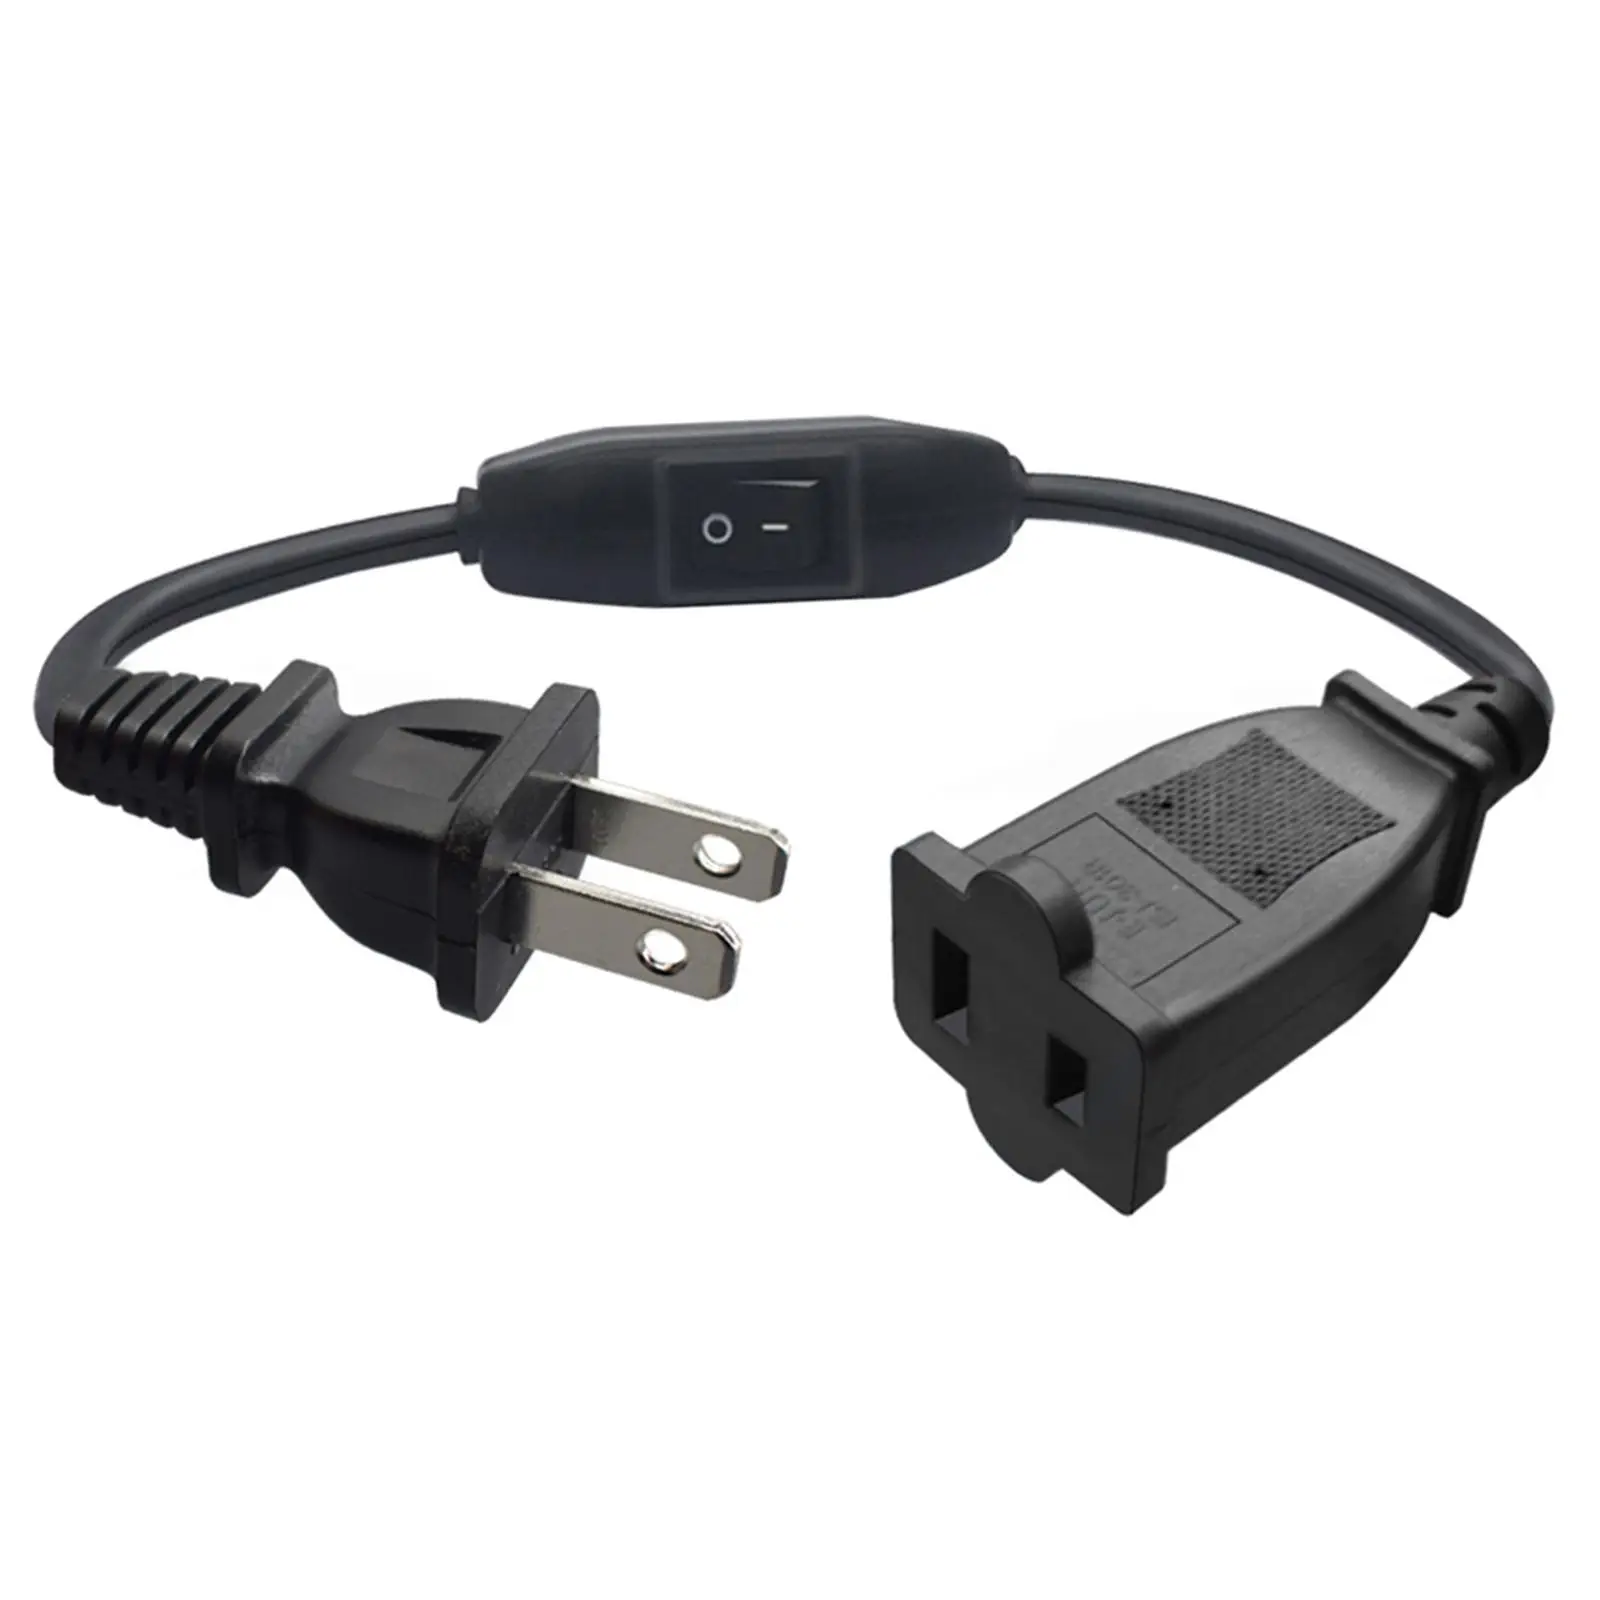 2 Prong Polarized Extension Cord with Switch for Lamps Power Adapters